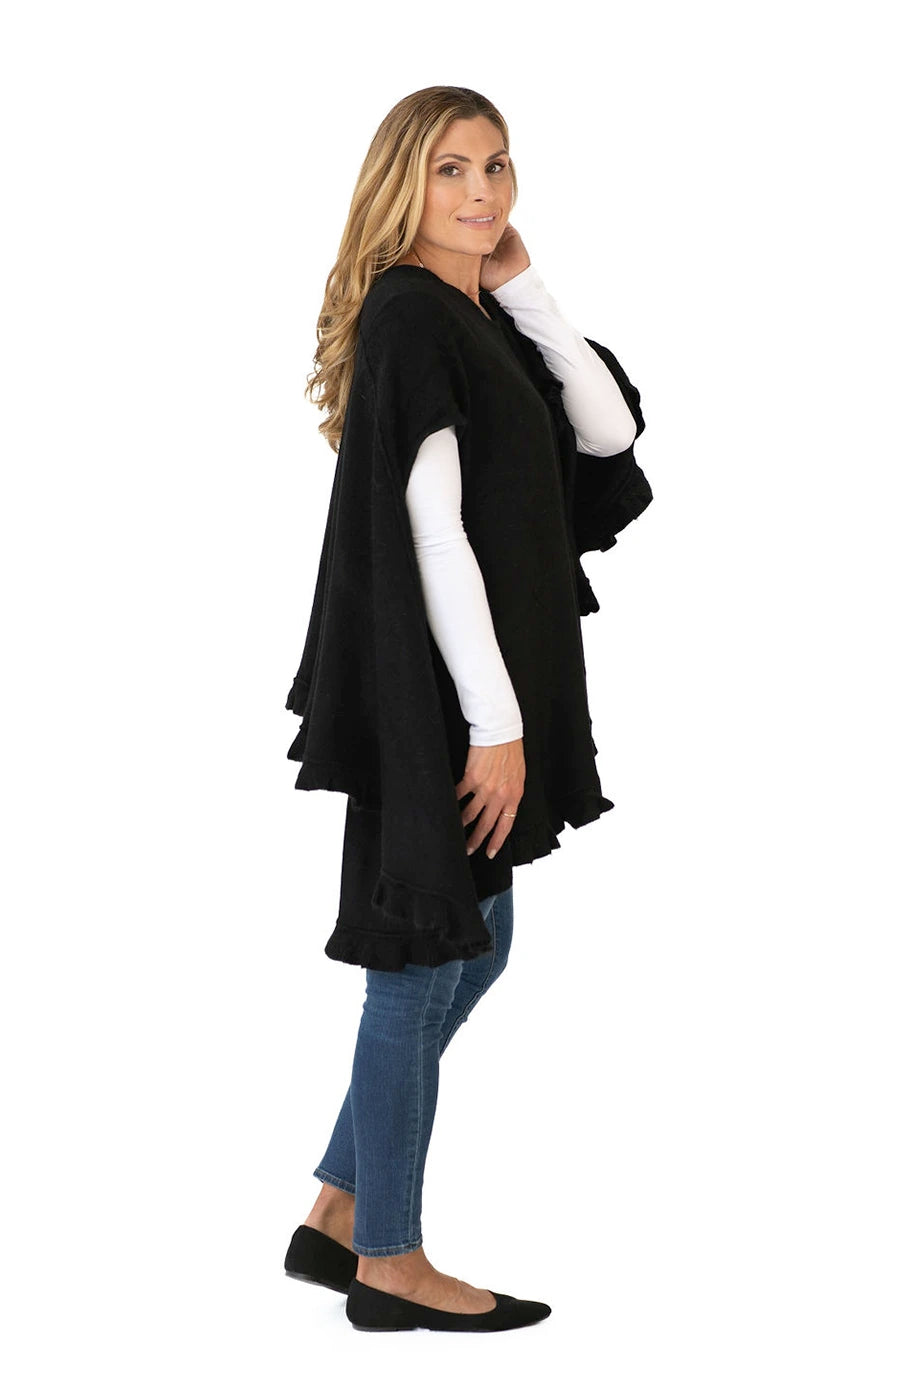 Shawl Sweater Vest in Black with Ruffle Trim